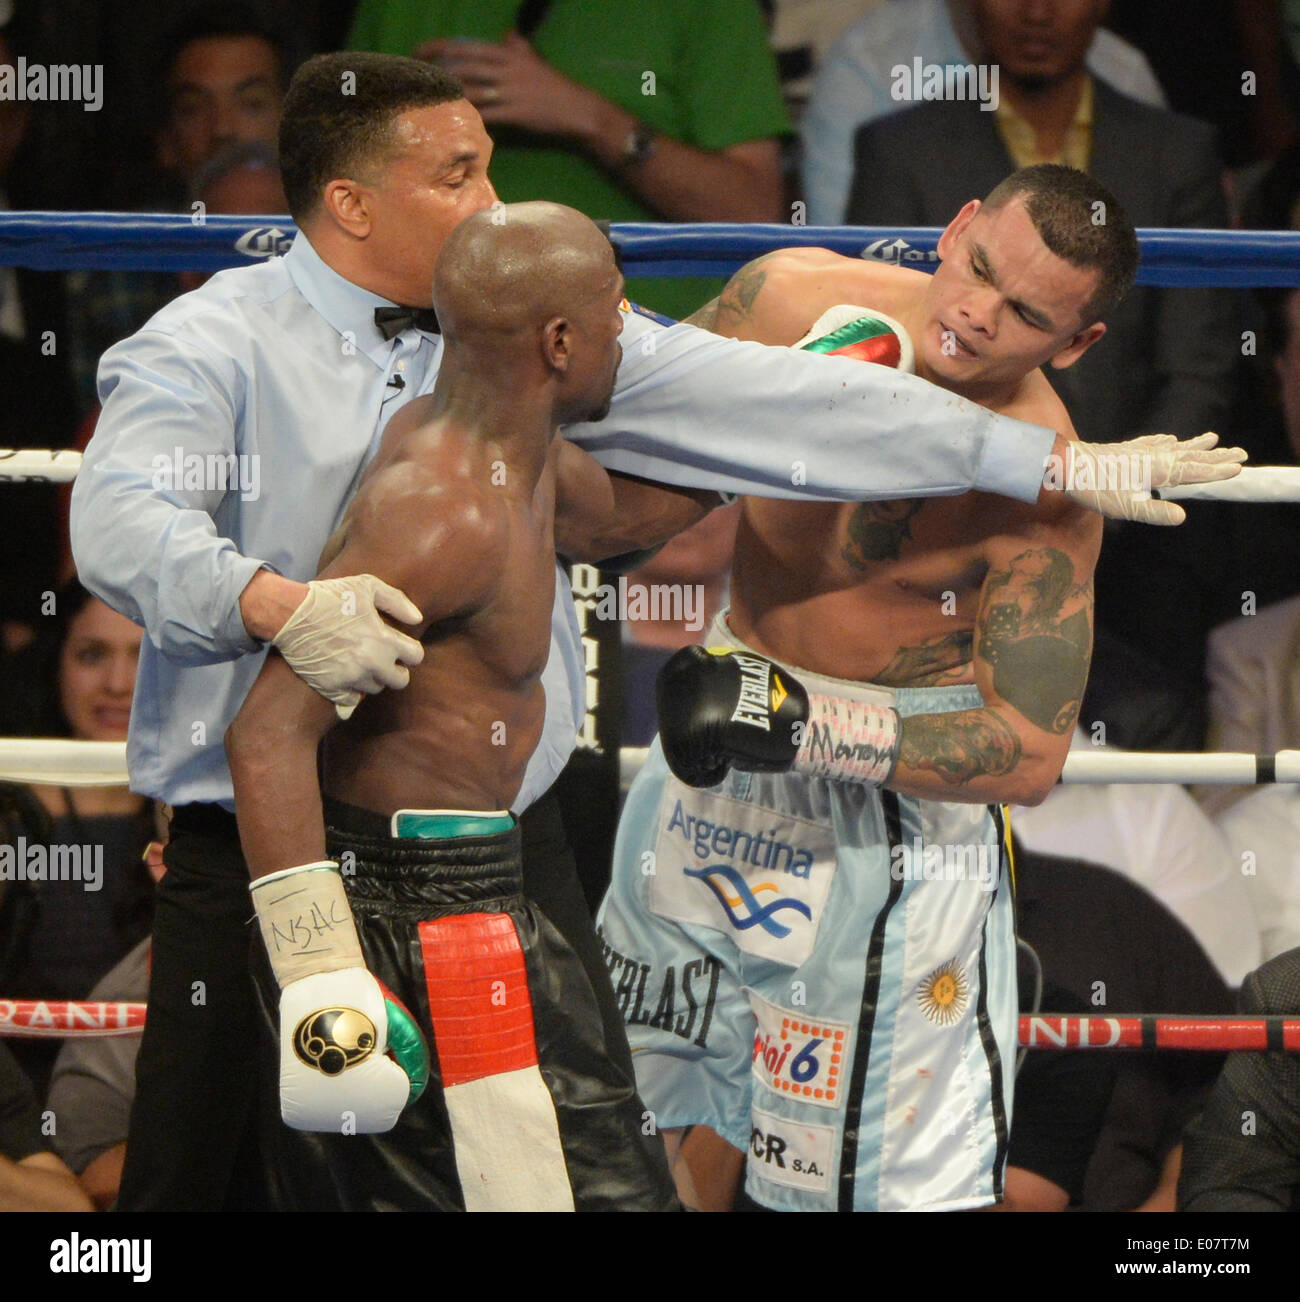 May 3, 2014. Las Vegas Nevada-USA.( in black trunks) Floyd Mayweather Jr. goes 12 rounds with Marco Maidana Saturday night at the MGM grand hotel. Floyd Mayweather Jr. took the win by a majority decision over Marco Maidana for the WBC-WBA & Ring magazine welterweight title in Las Vegas.Photo by Gene Blevins/LA DailyNews/ZumaPress (Credit Image: © Gene Blevins/ZUMAPRESS.com) Stock Photo